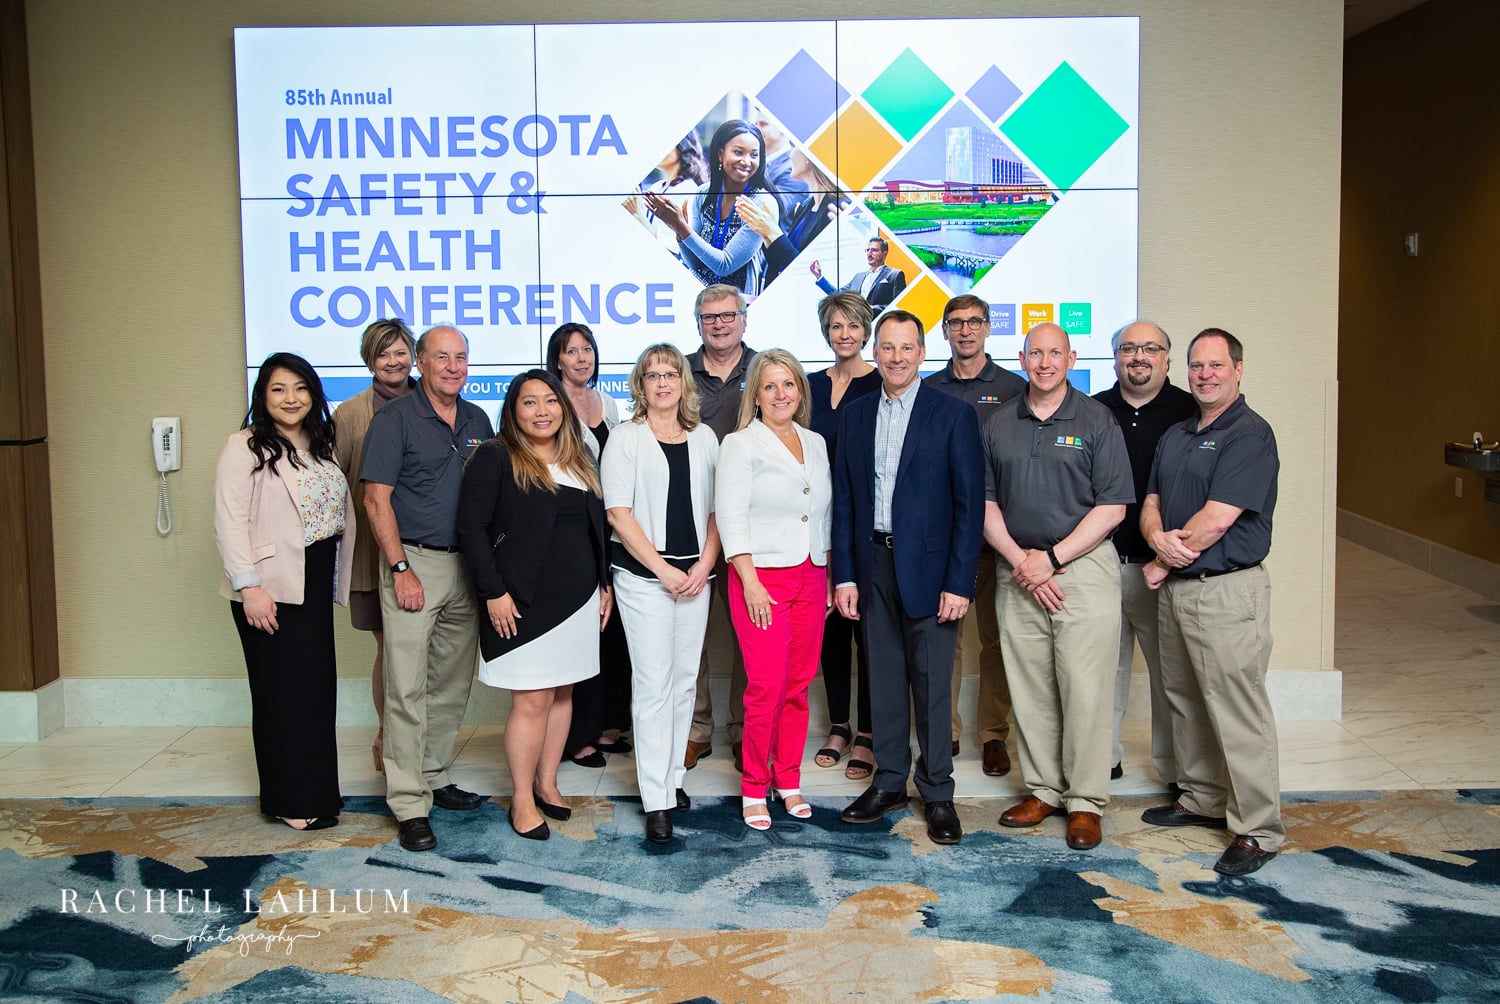 MN Safety Council 2019 Annual Conference Rachel Lahlum Photography